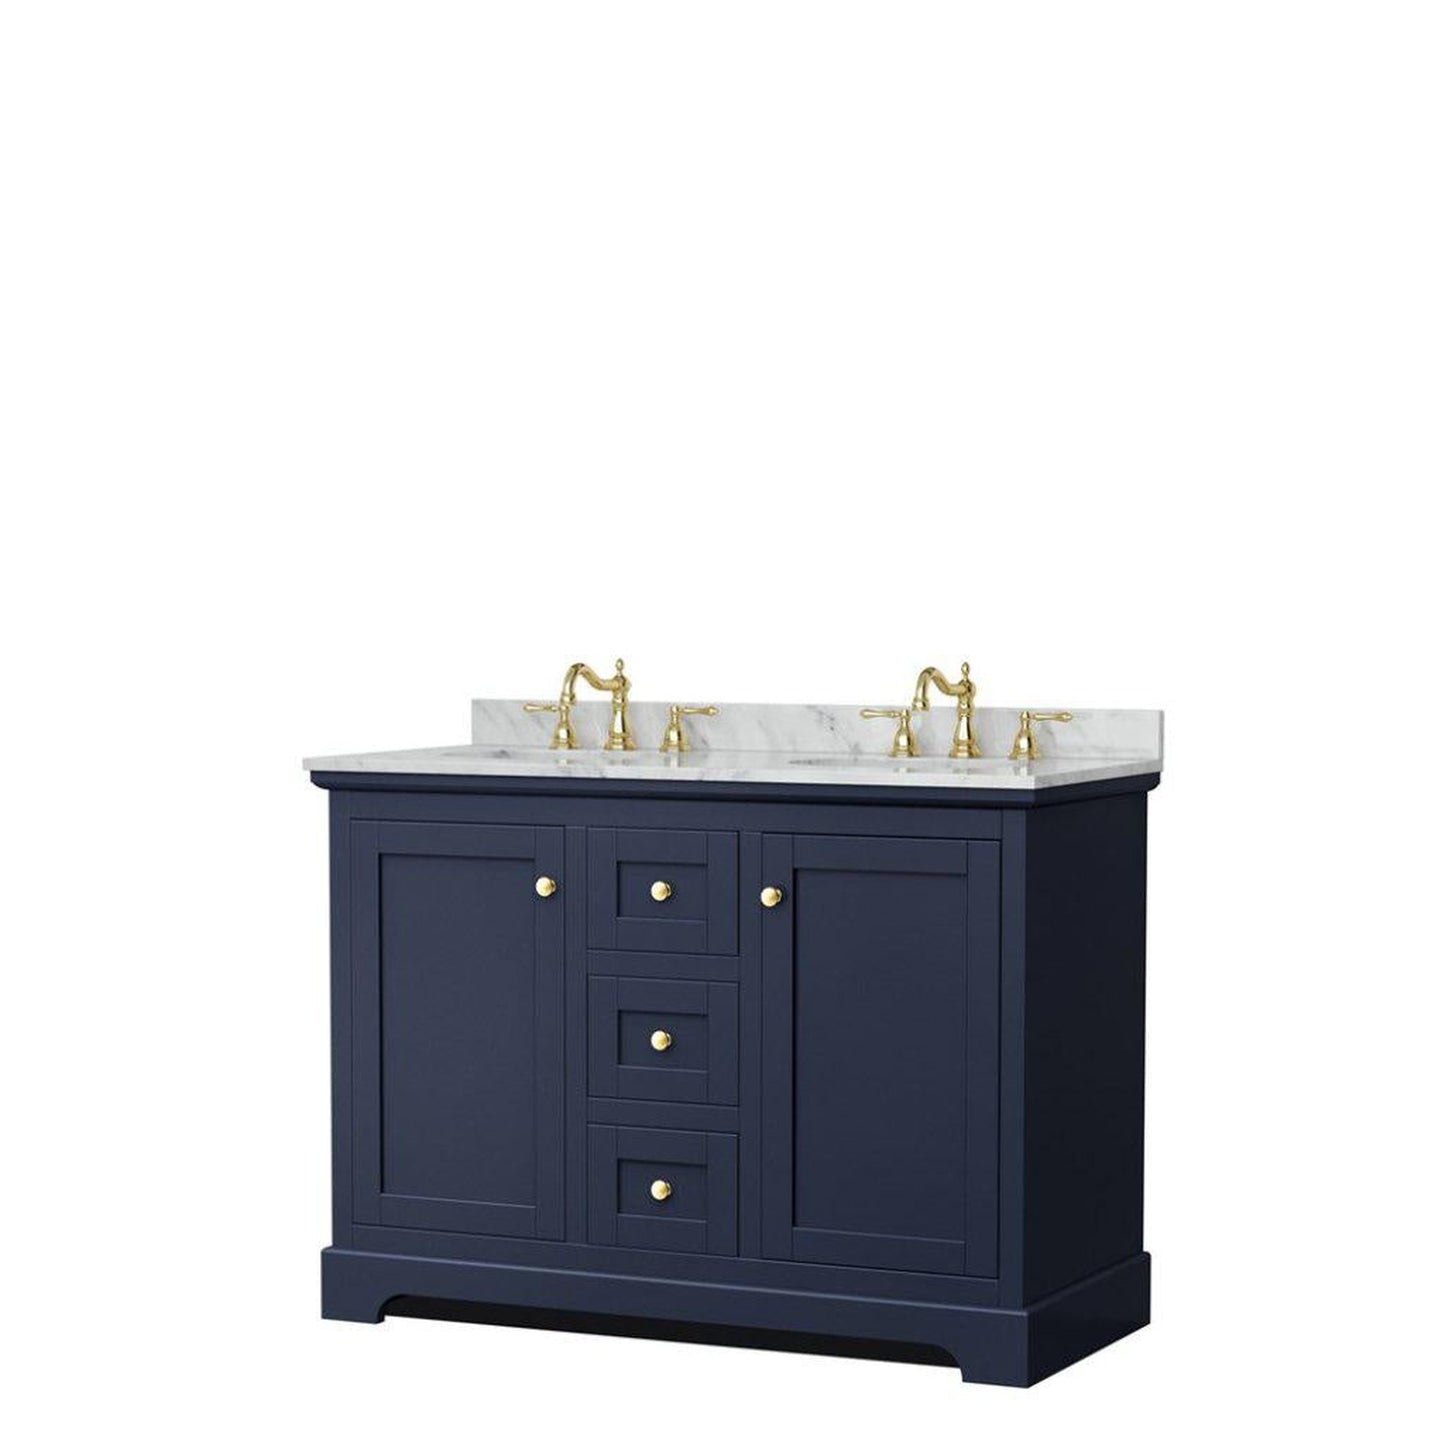 Wyndham Collection Avery 48" Dark Blue Double Bathroom Vanity With White Carrara Marble Countertop With 3-Hole Faucet And 8" Oval Sink